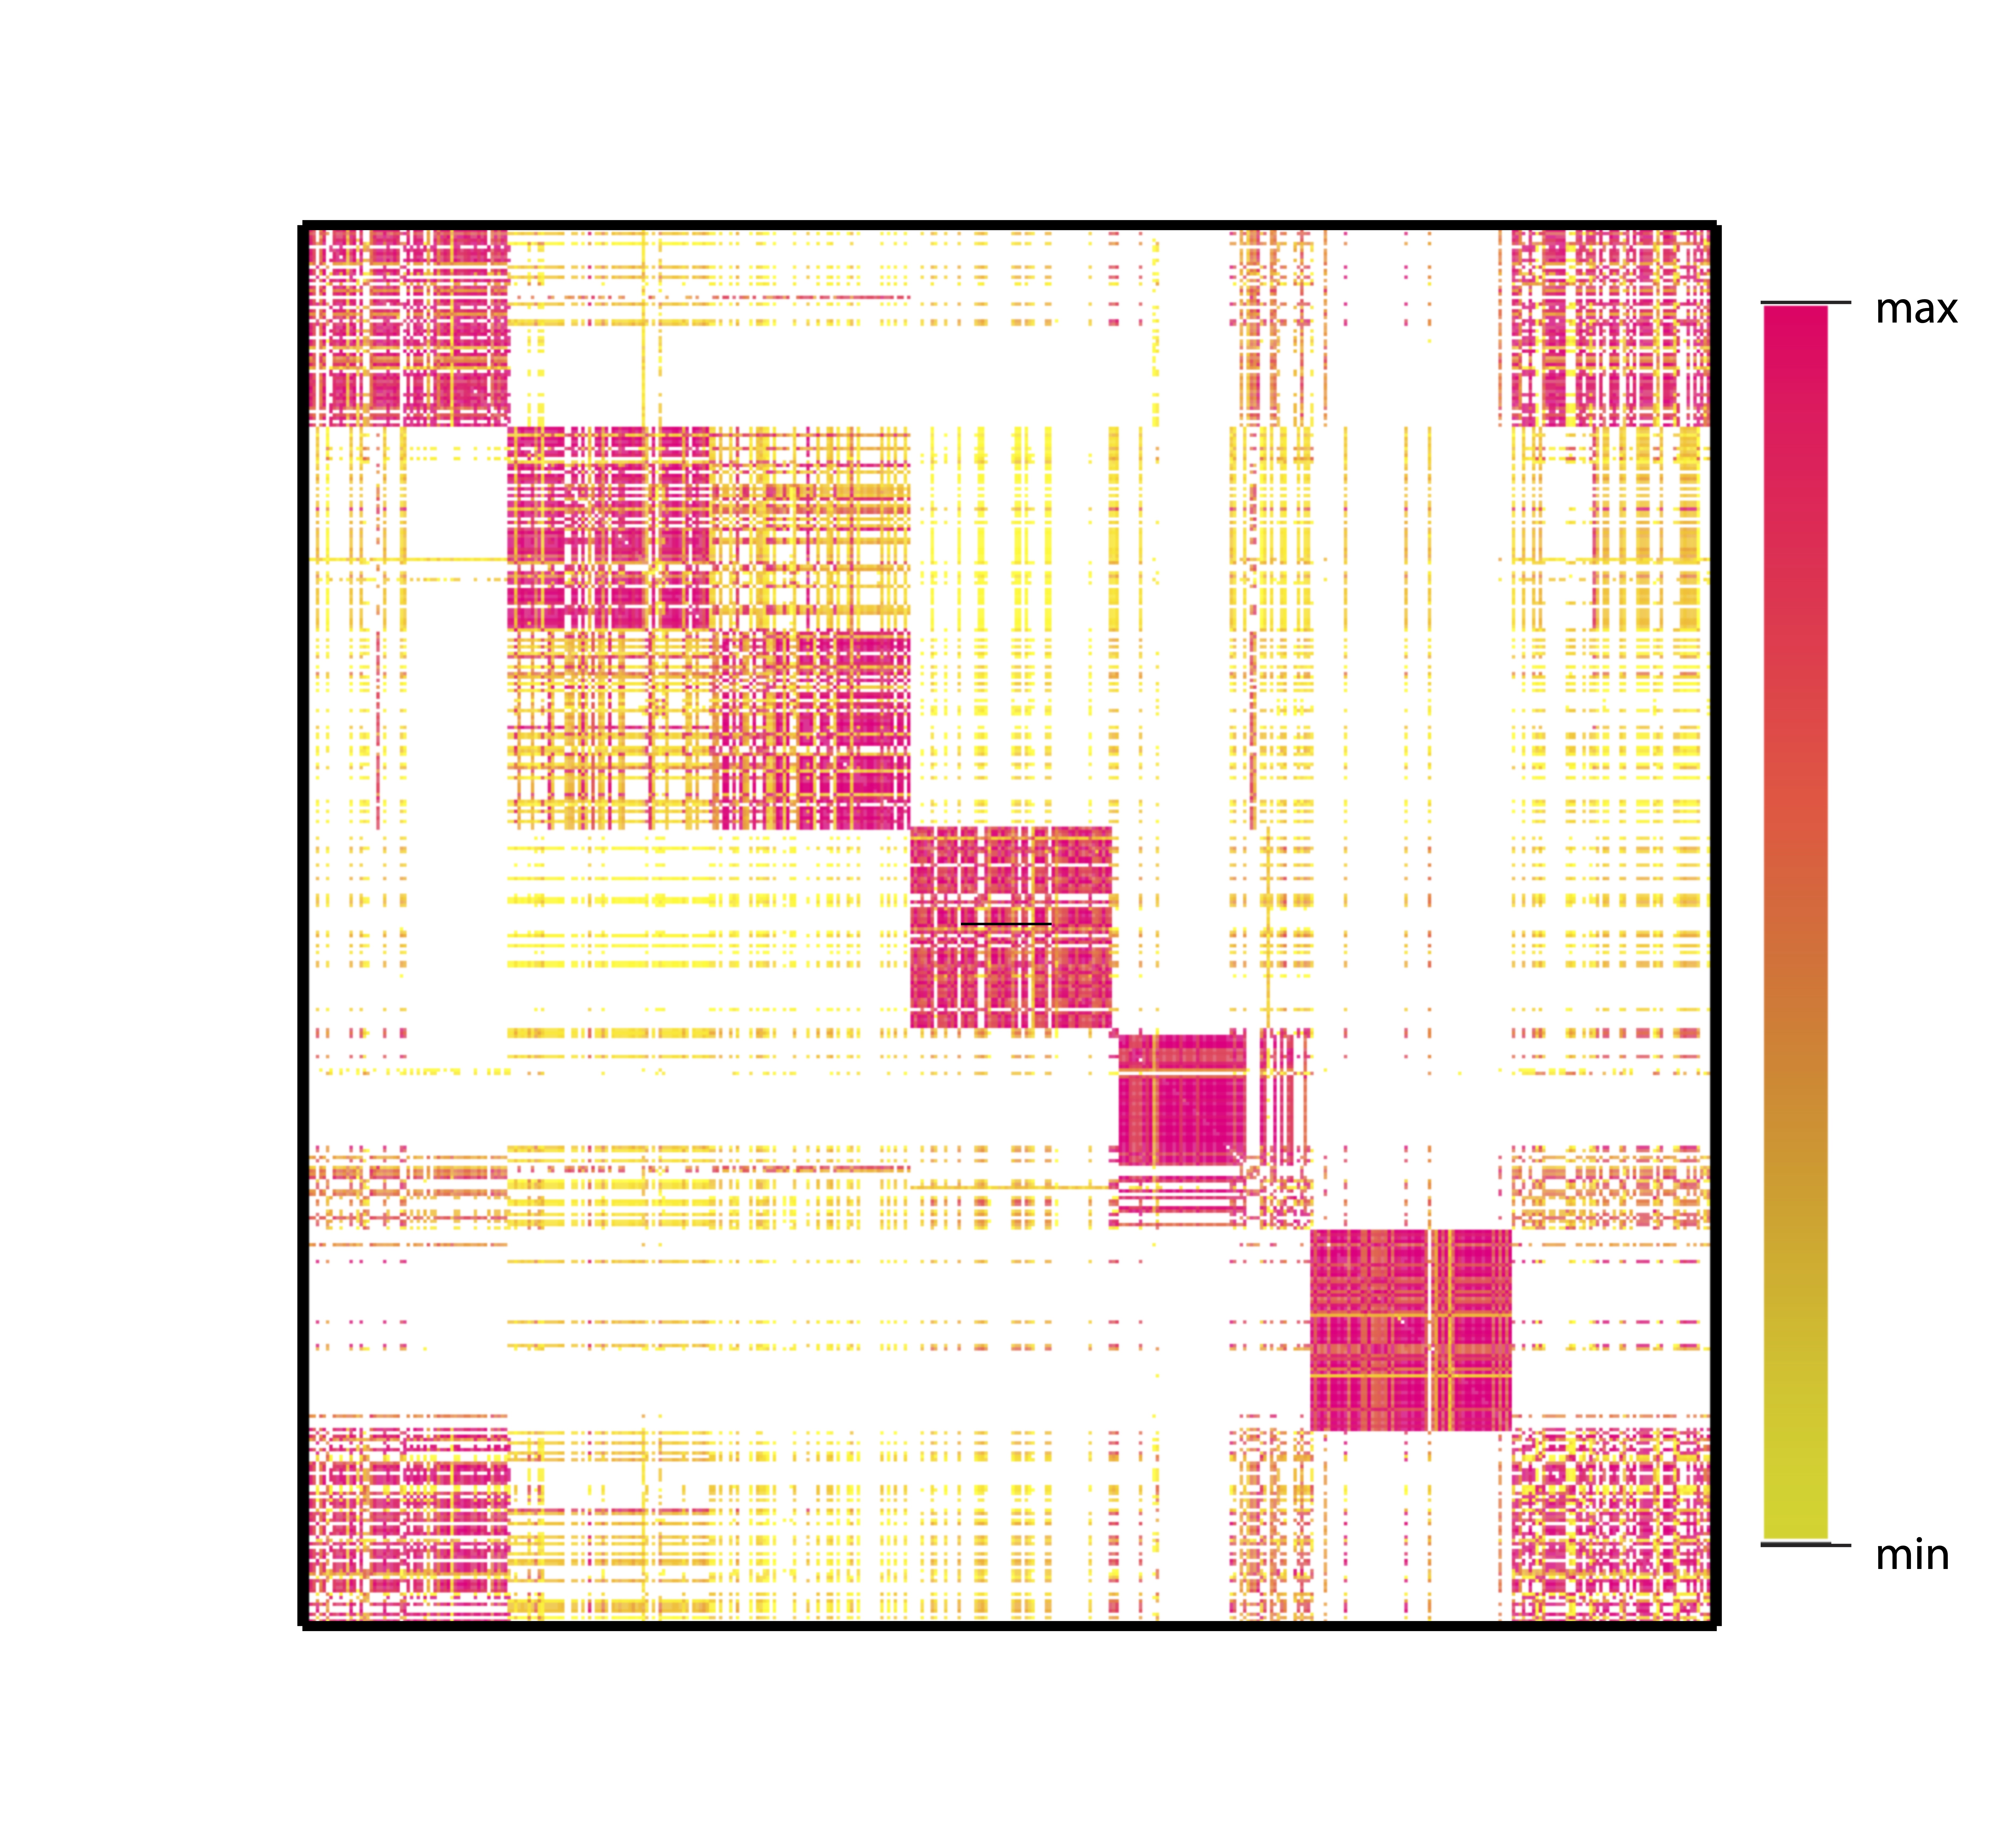 Heat Map of Similarity Matrix Exhibiting Cluster Structure